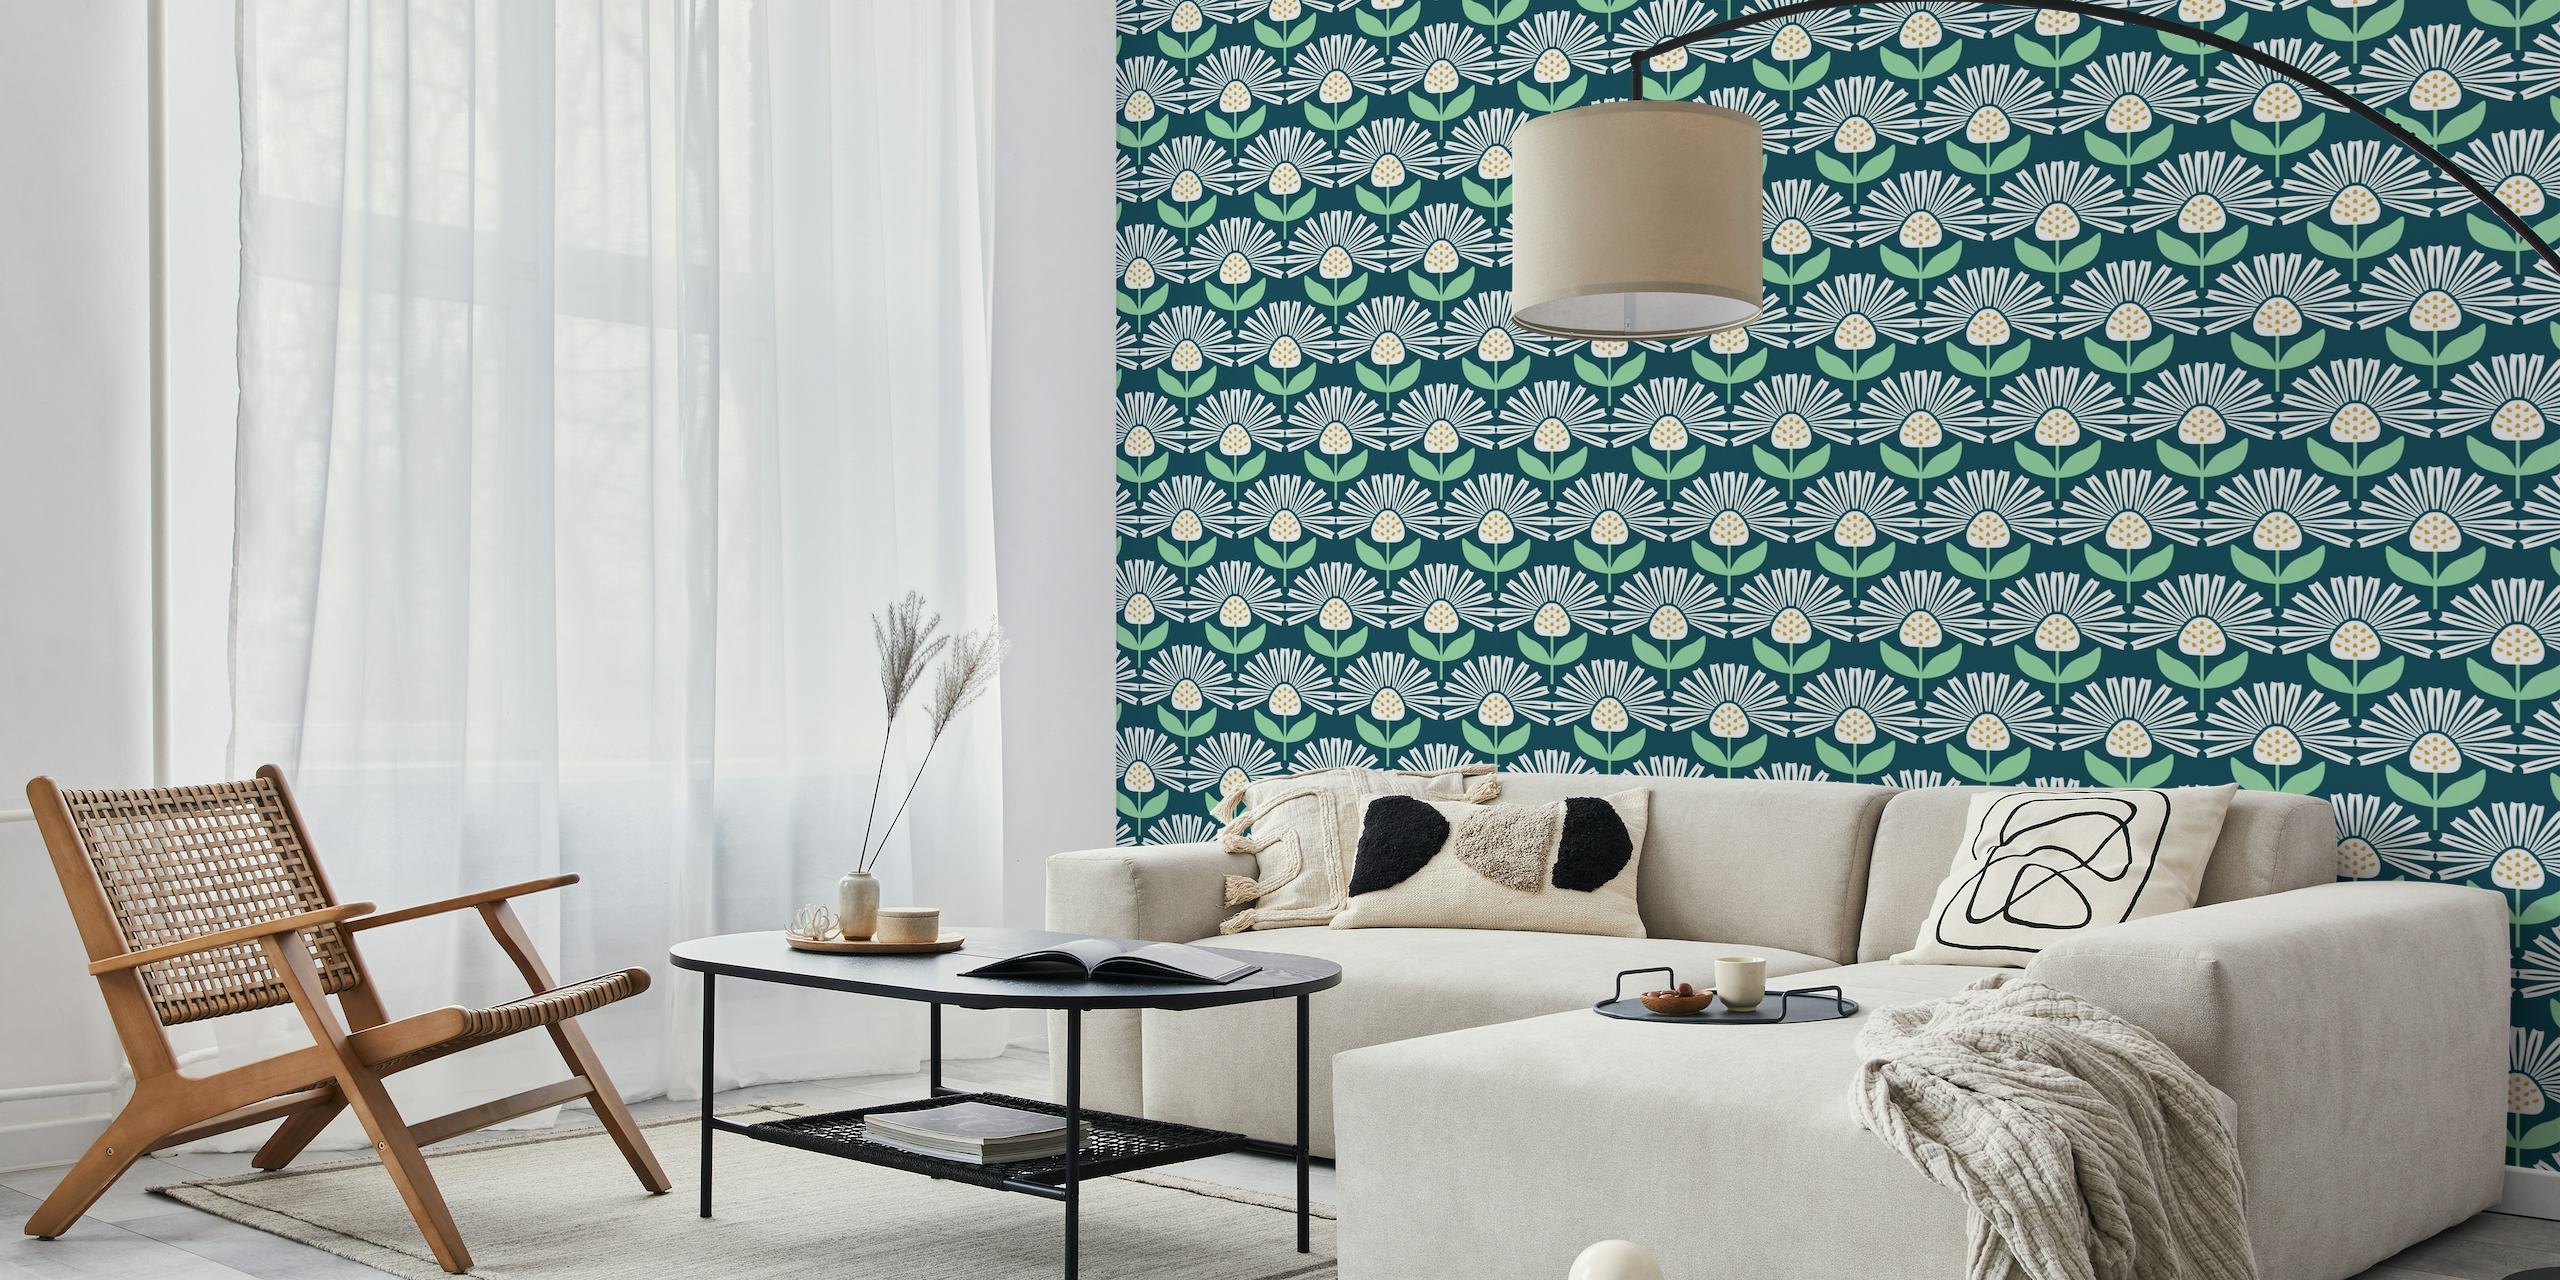 Modern Retro Flower Blue pattern wall mural with stylized floral and geometric shapes